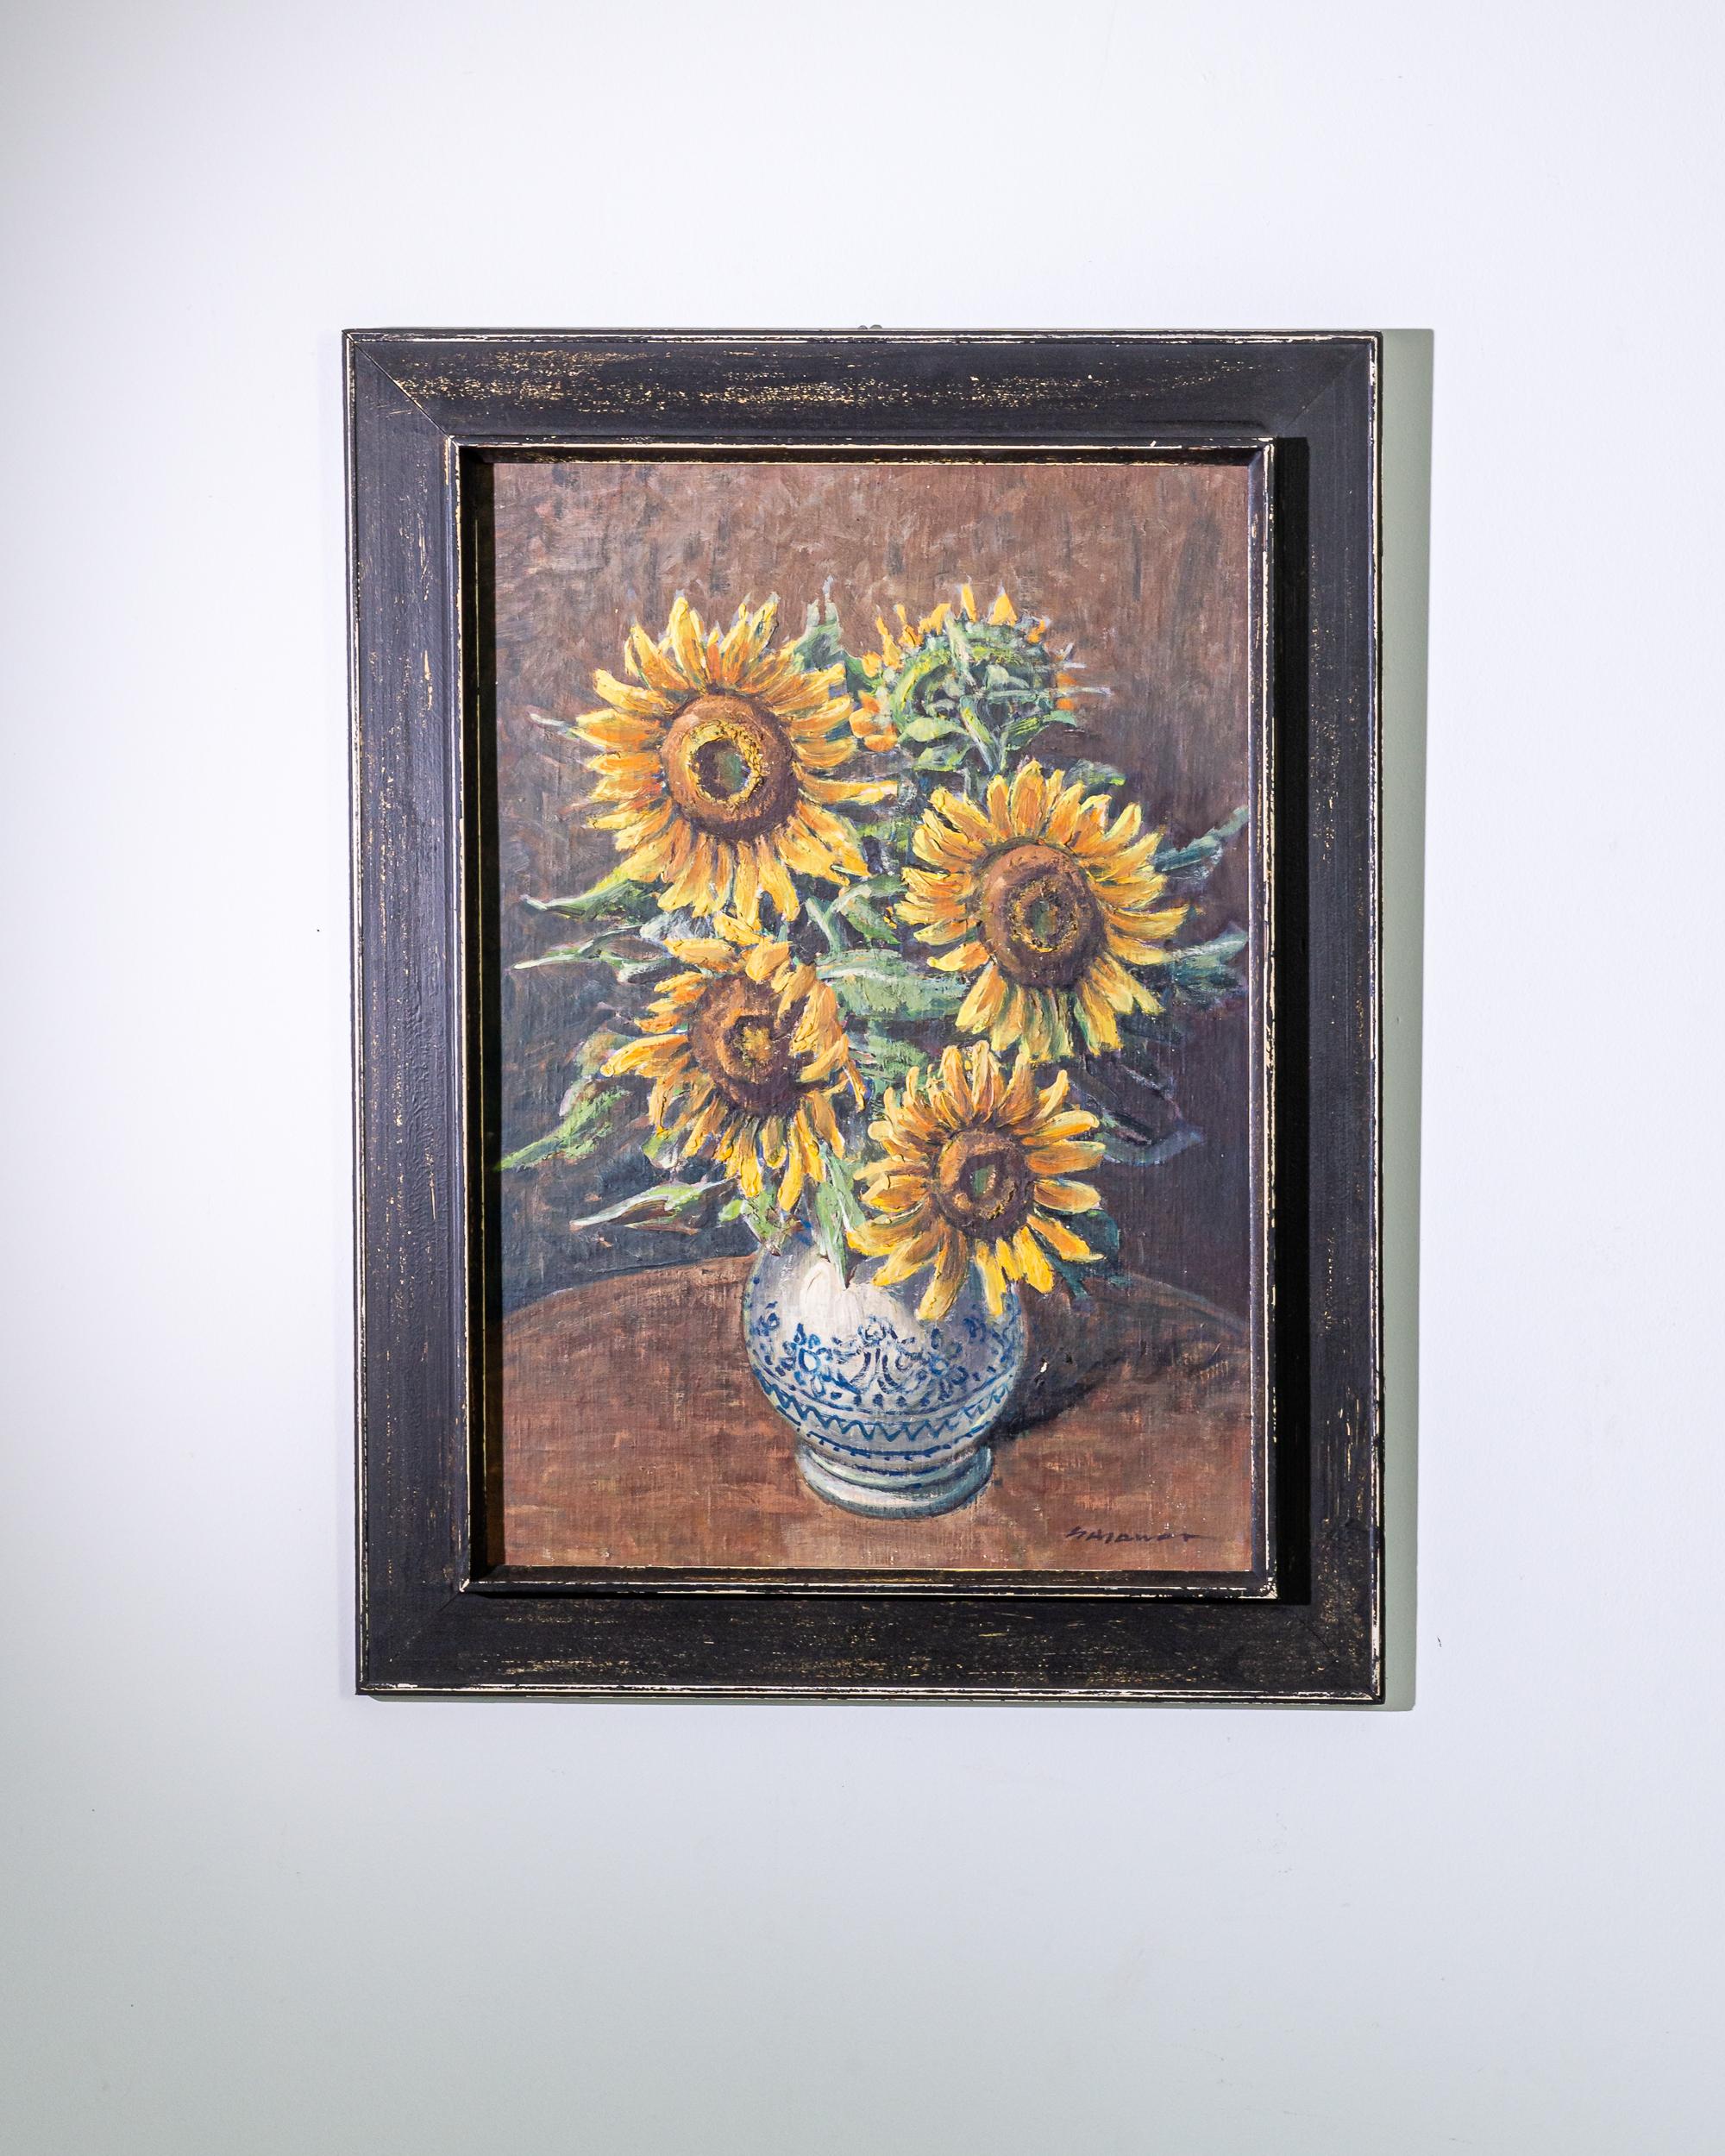 Made in the twentieth century in former Czechoslovakia, this energetic still life depicts a vase with sunflowers painted in confident broad brushstrokes. The harmonious combination of the realistic and impressionist elements accentuates the rich